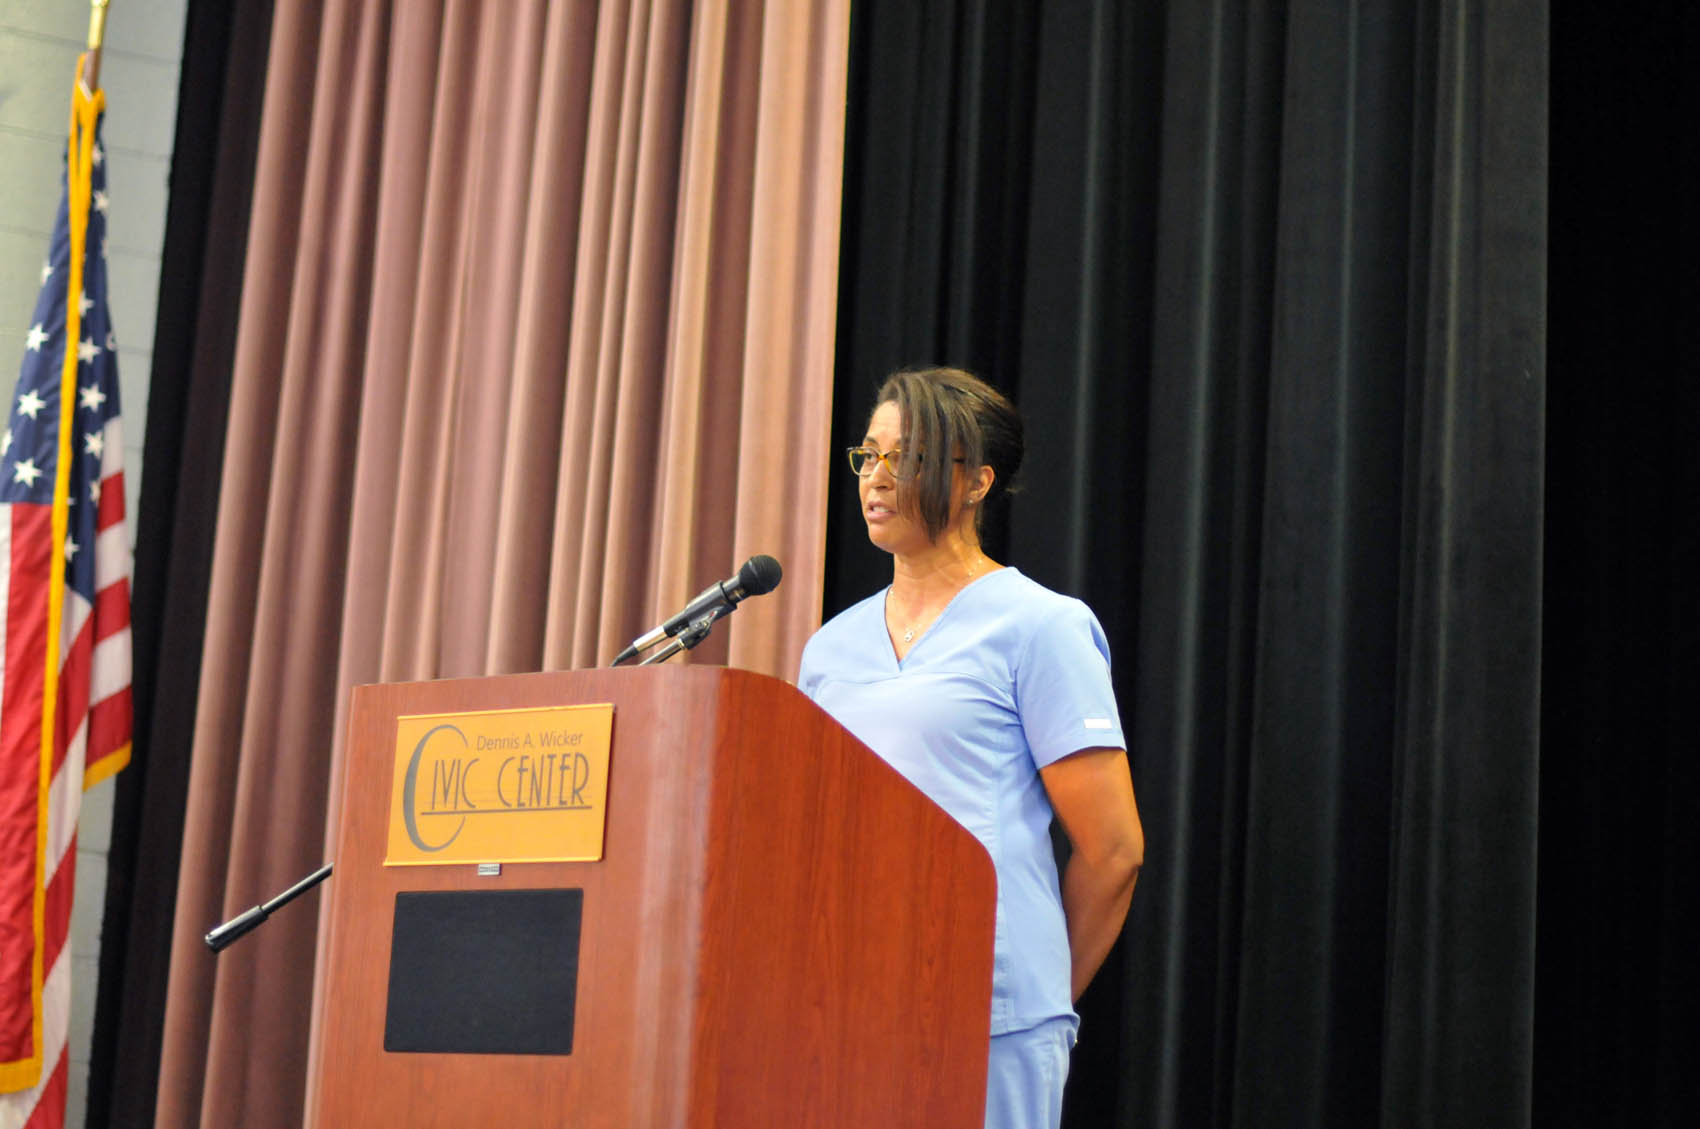 Click to enlarge,  Stacey Reyesmejia, of Cumberland County, was one of three student speakers at the Central Carolina Community College Division of Economic and Community Development Continuing Education medical programs graduation. The event was held May 25 at the Dennis A. Wicker Civic Center in Sanford. For more information about Continuing Education medical programs, call Lennie Stephenson, CCCC's Director of Continuing Education medical programs, at 910-814-8833 or email lstephenson@cccc.edu. 